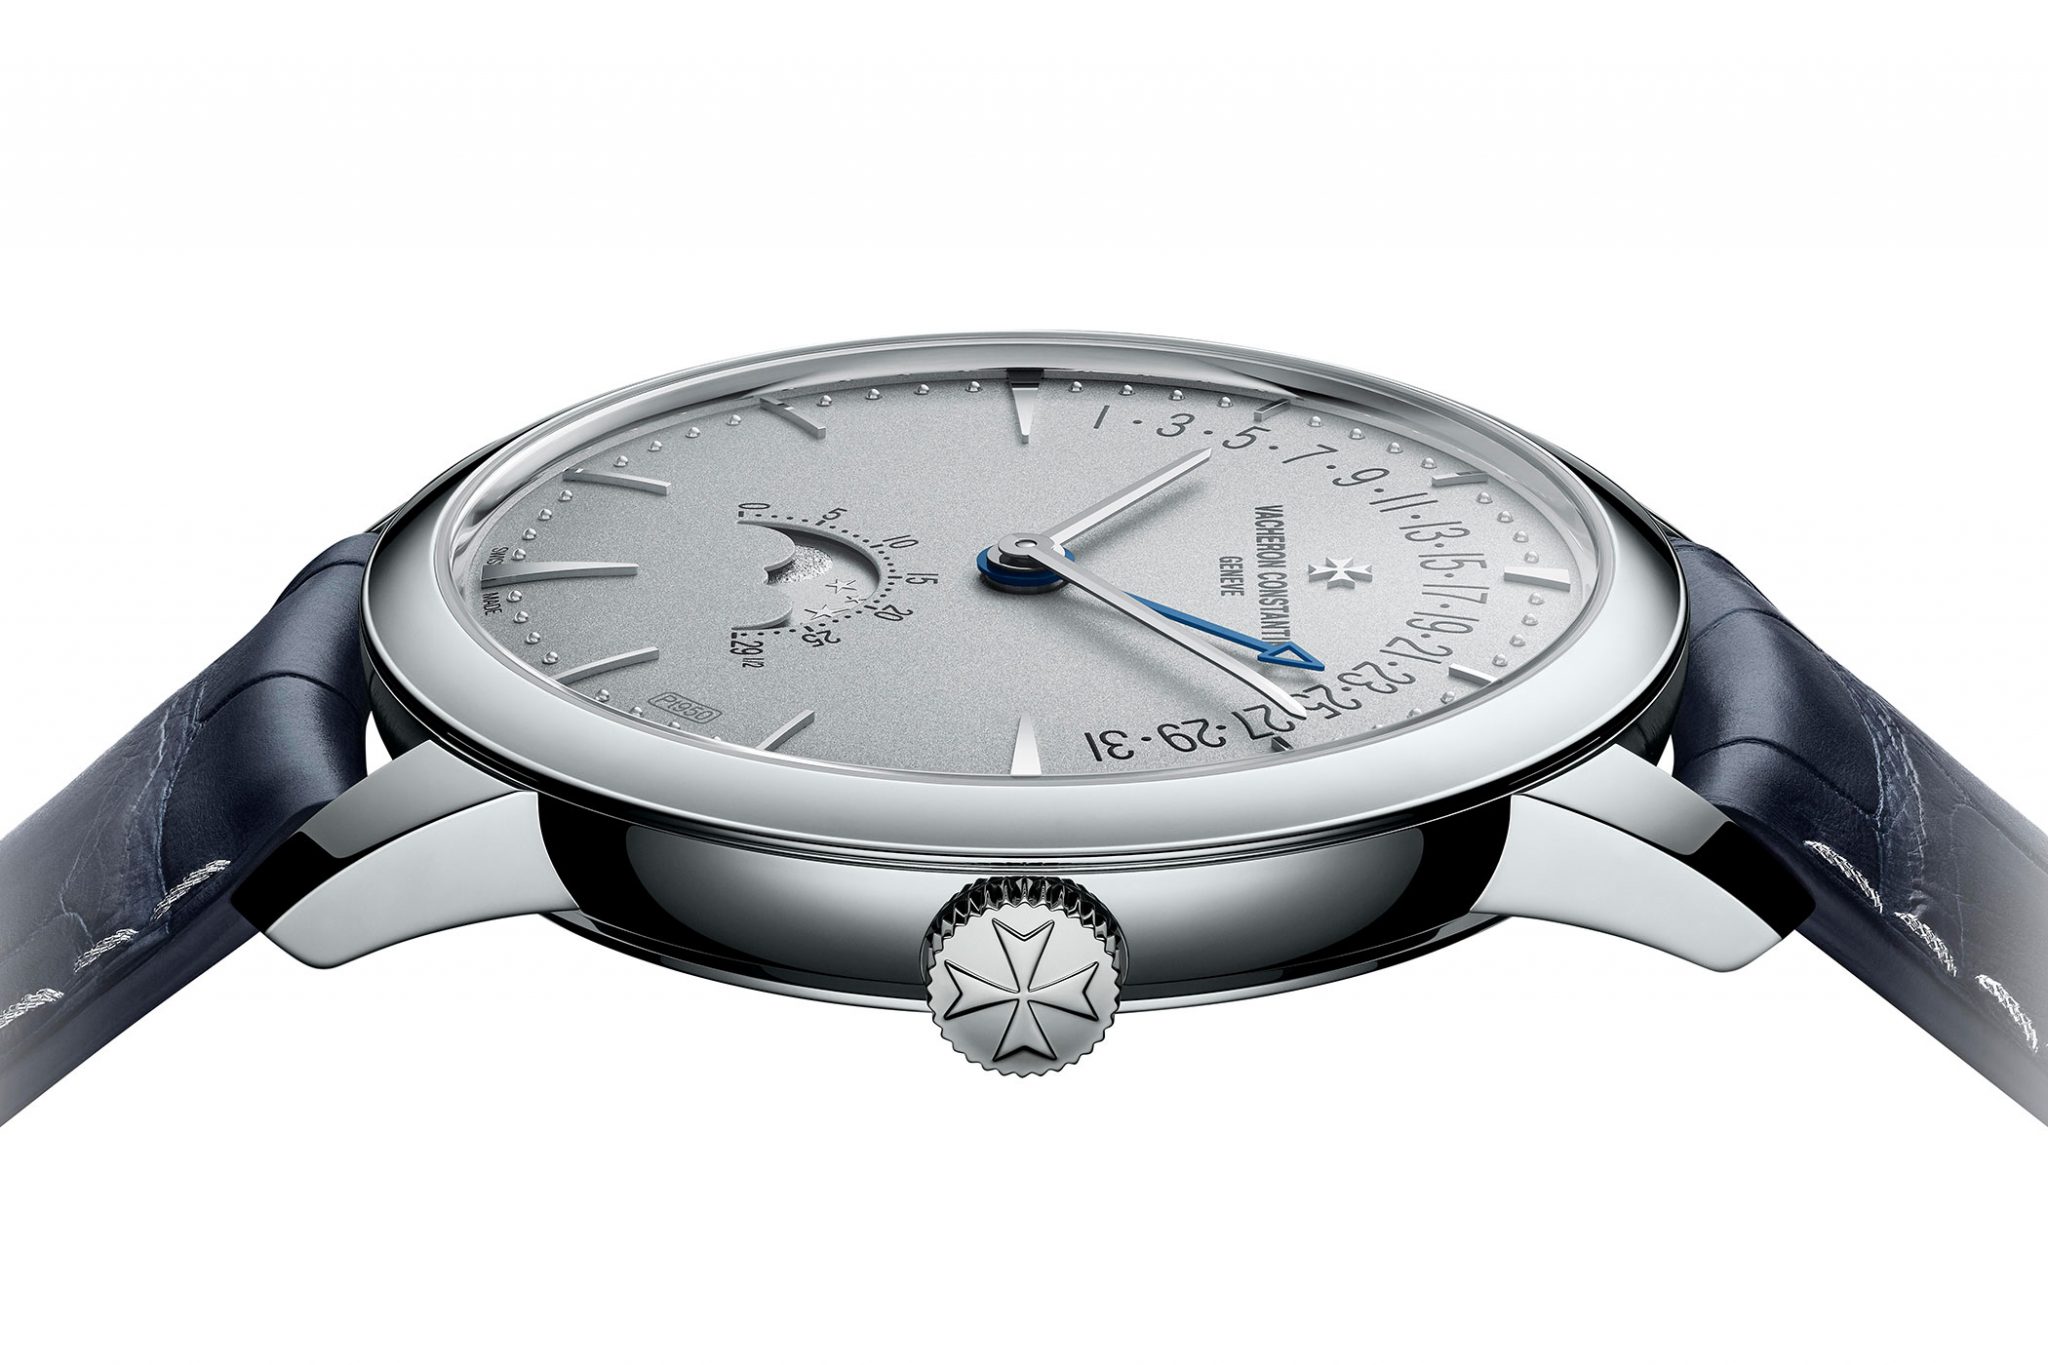 Vacheron Constantin Patrimony Moon Phase Retrograde Date Collection Excellence Platine 4010U 000P B545 Thickness sideview crown